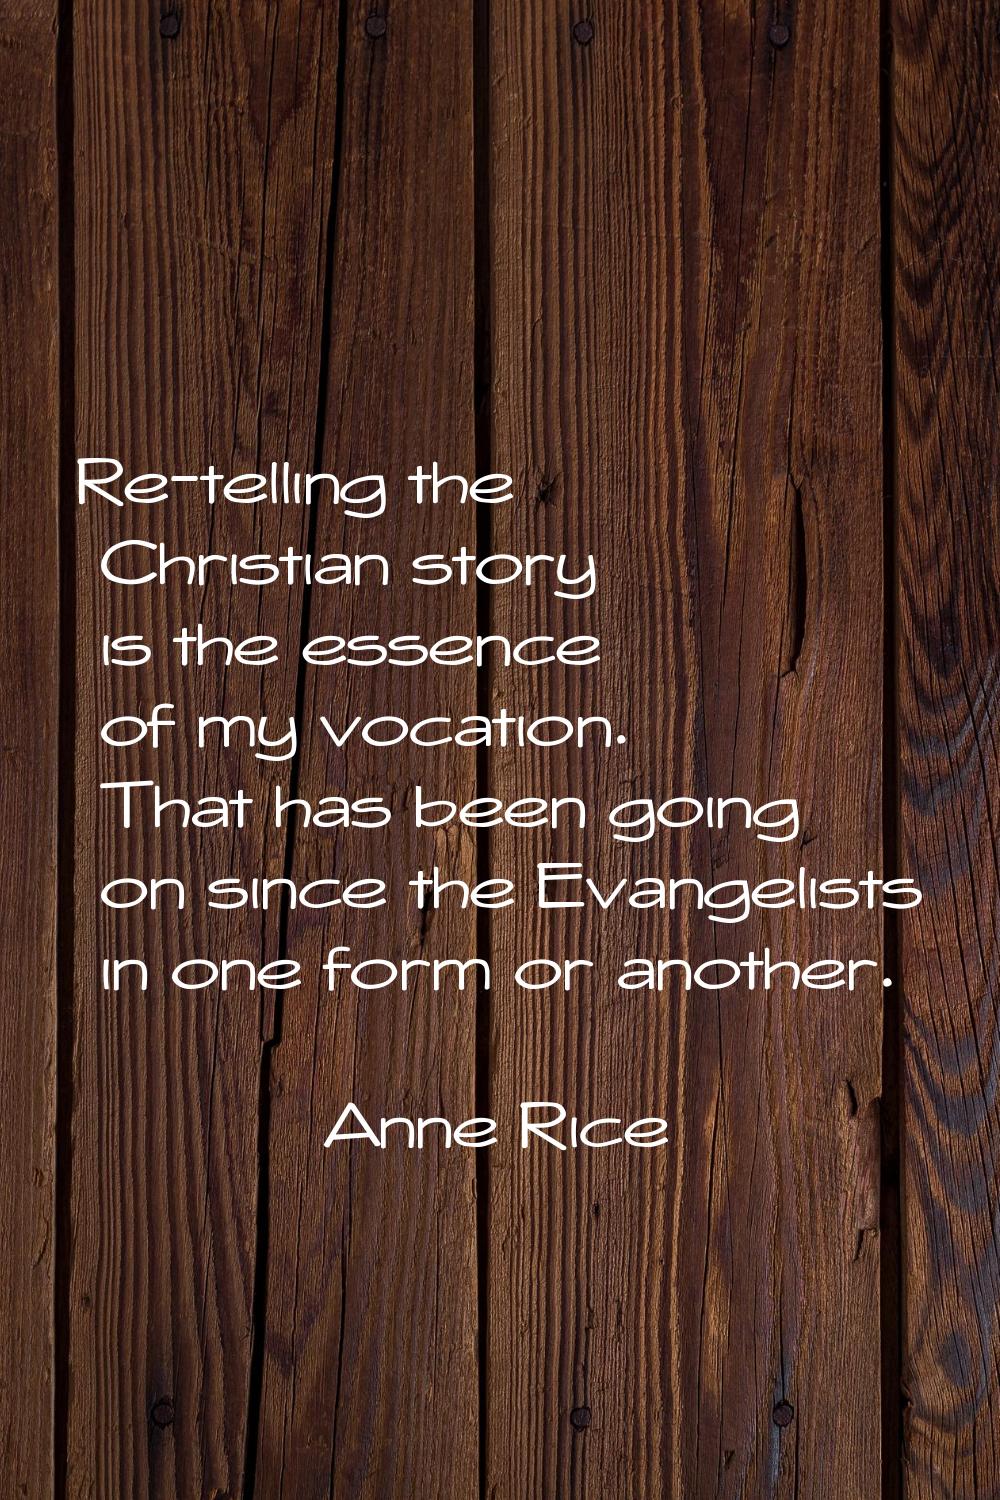 Re-telling the Christian story is the essence of my vocation. That has been going on since the Evan